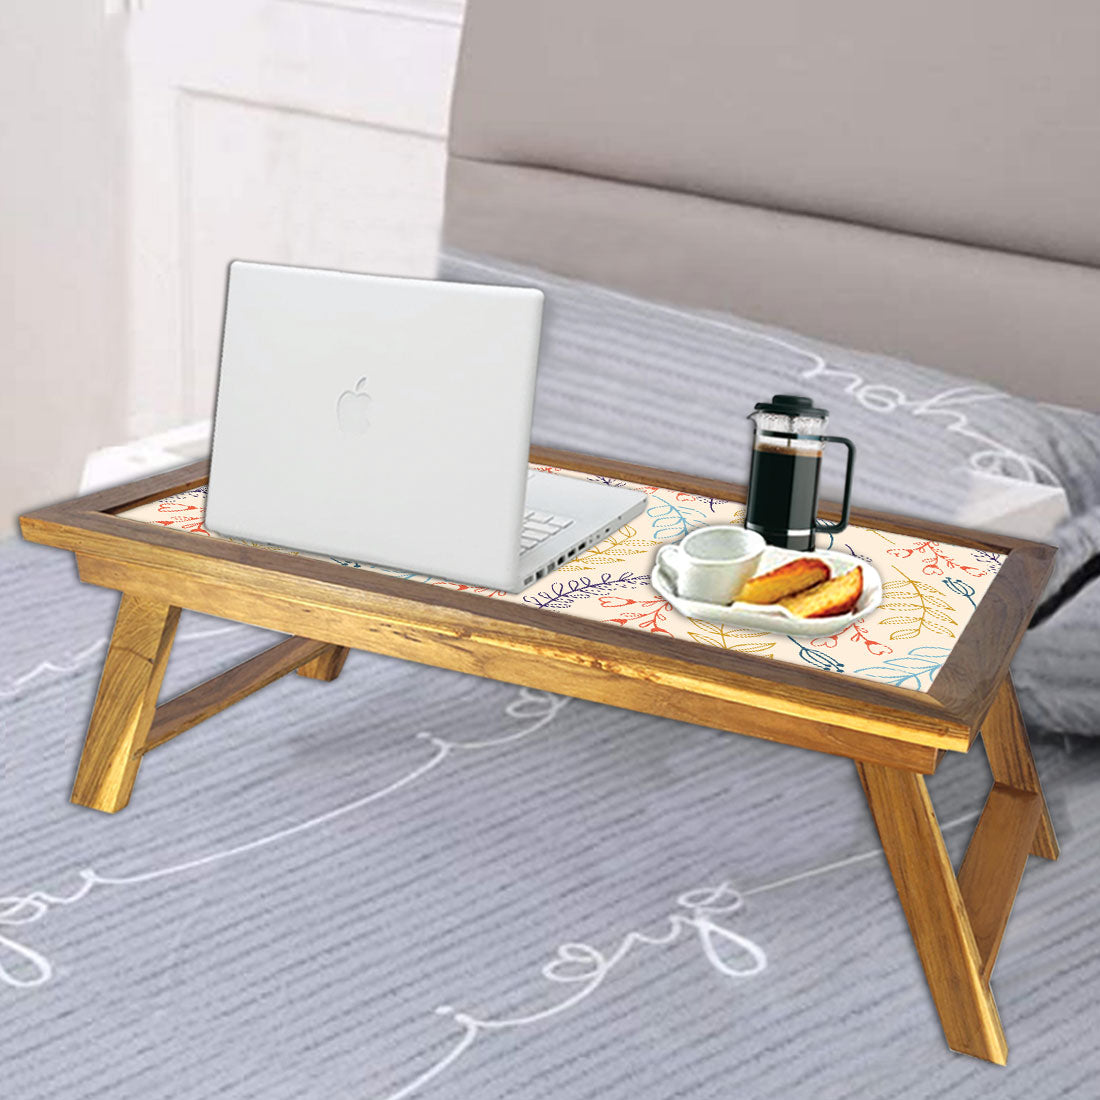 Nutcase Folding Laptop Table For Home Bed Lapdesk Breakfast Table Foldable Teak Wooden Study Desk - Leaves and Branches - White Nutcase